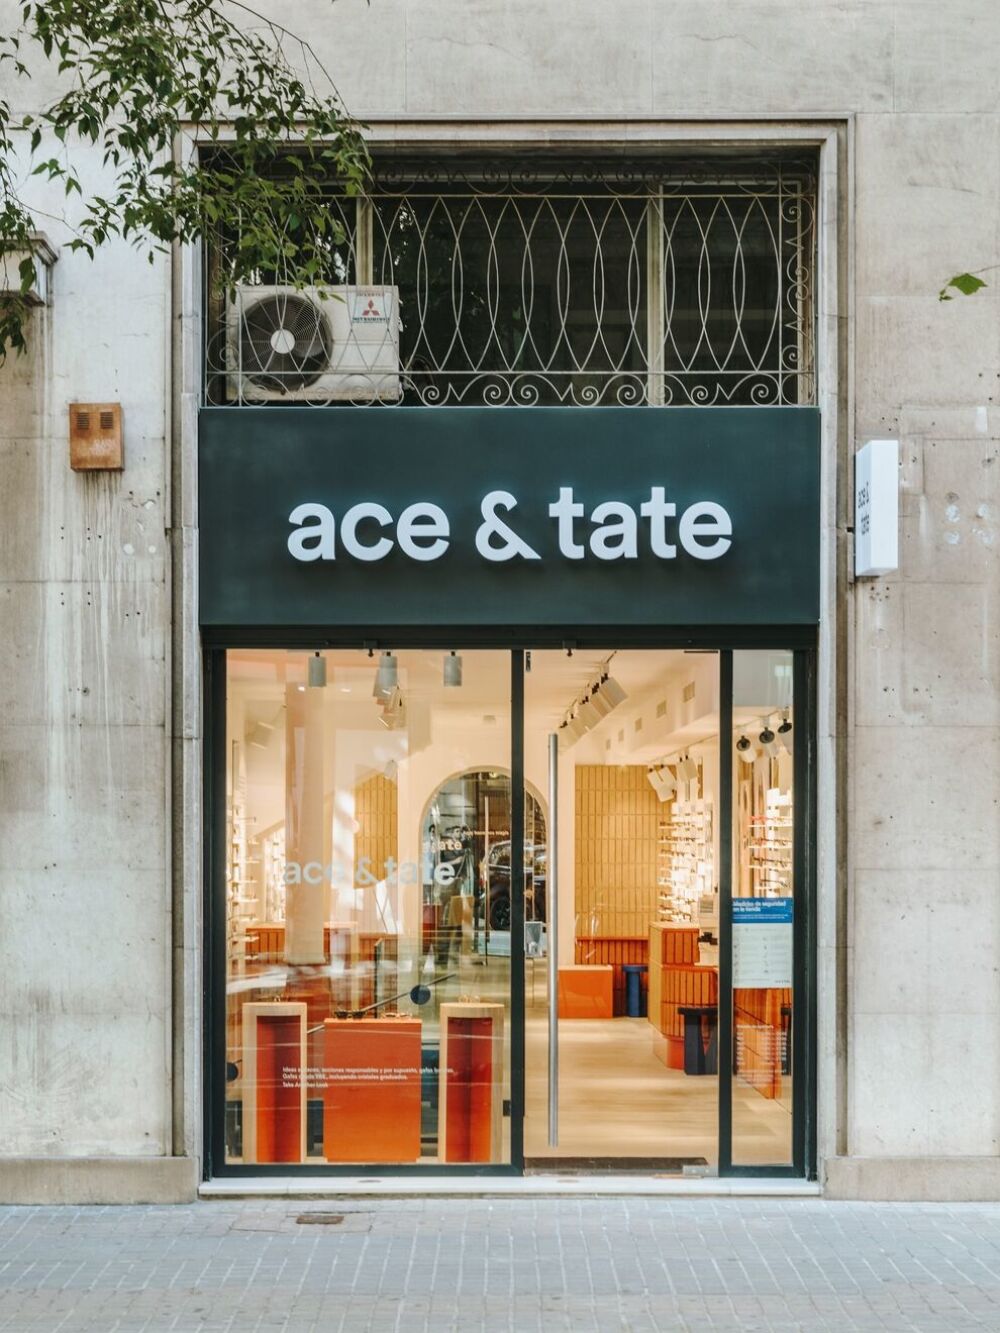 In-store concept Wall mural by José Antonio Roda for Ace & Tate